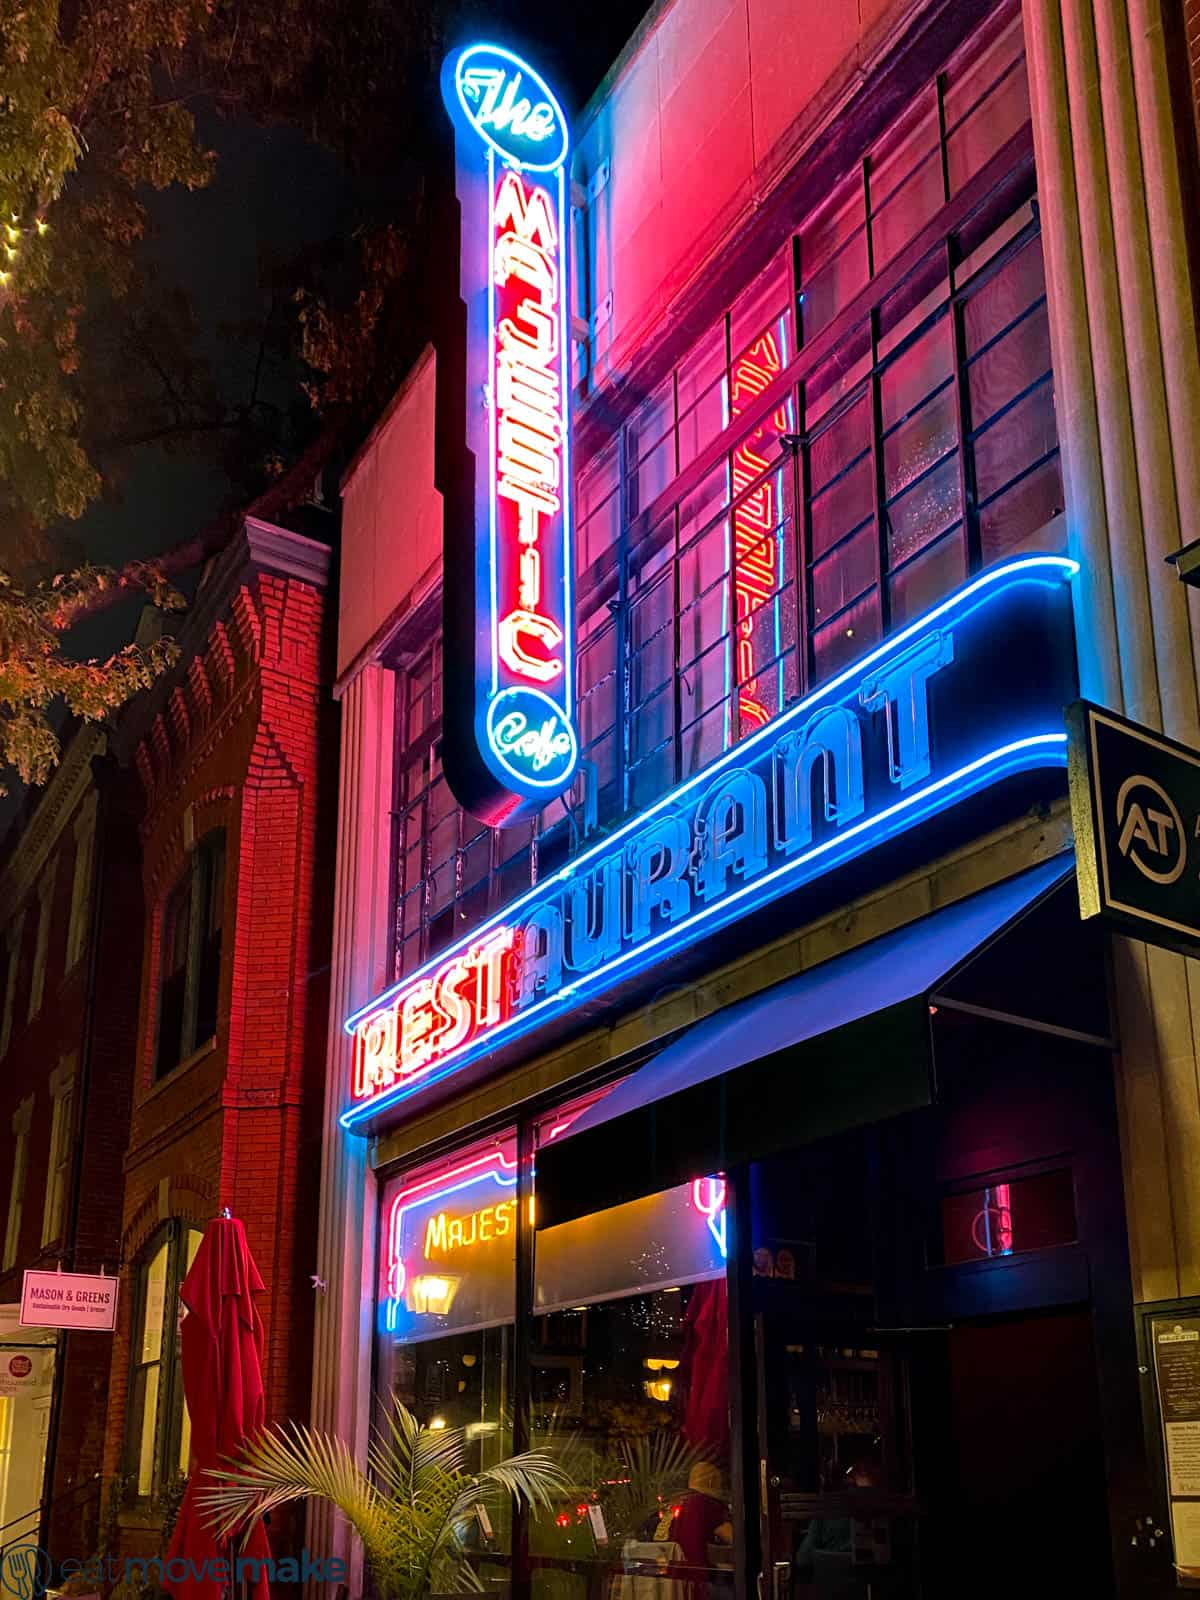 Majestic Cafe neon sign